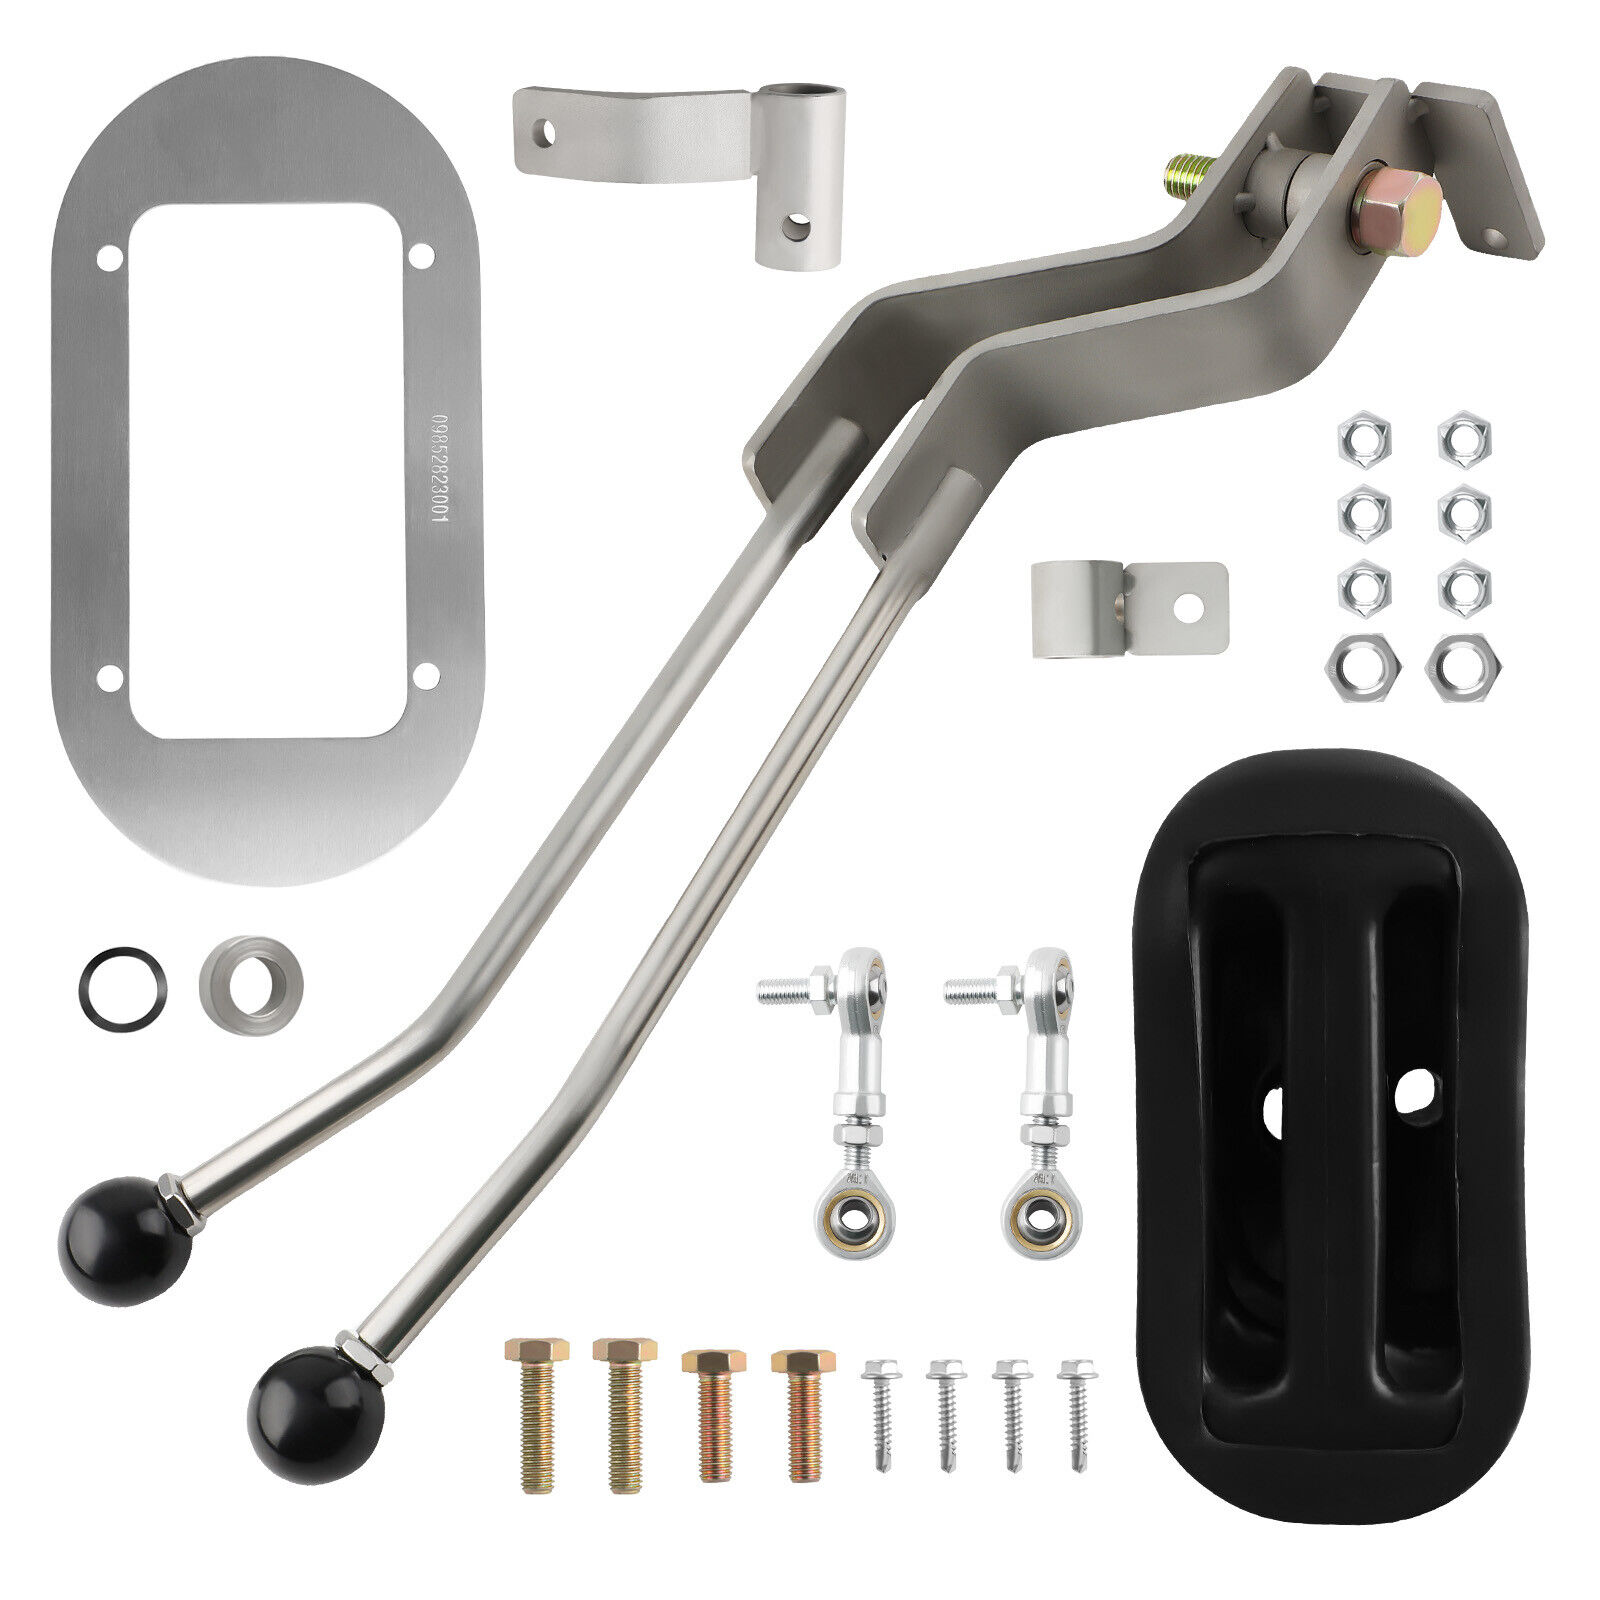 Stainless Twin-stick Shifter + Boot Kit for NP205 8-Bolt Transfer Case NP205GM8